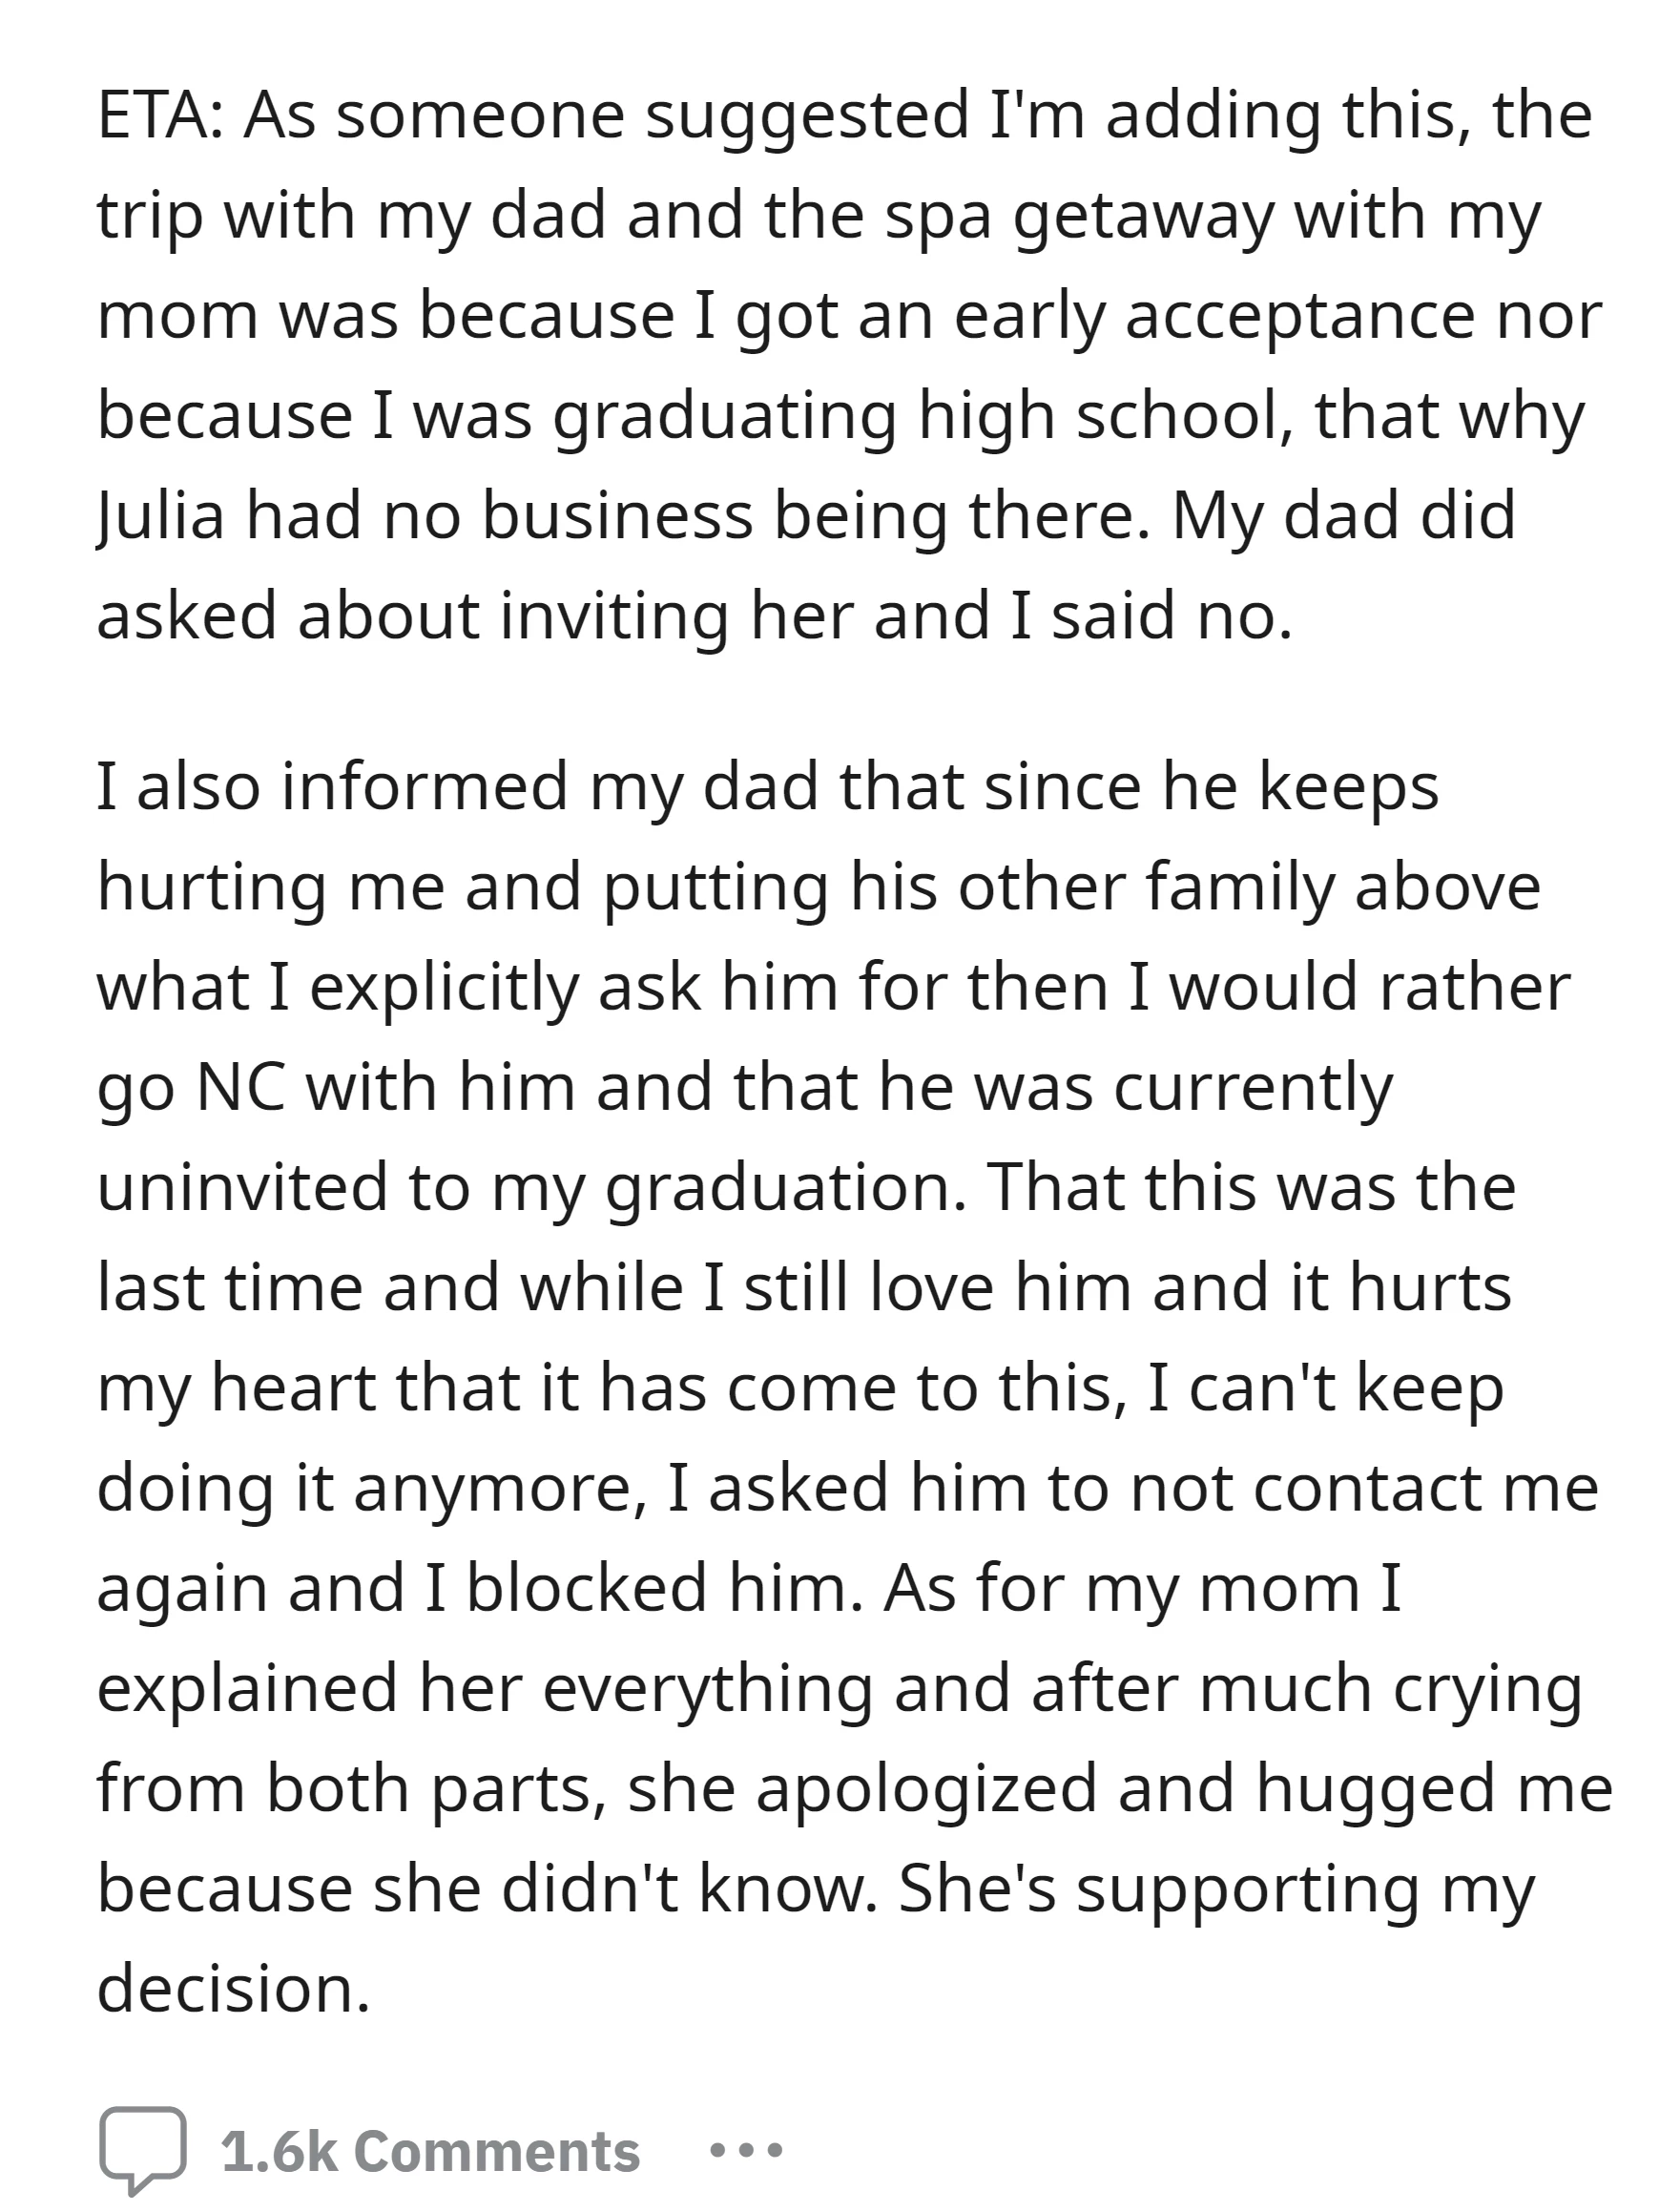 OP informed her dad that she was going no contact